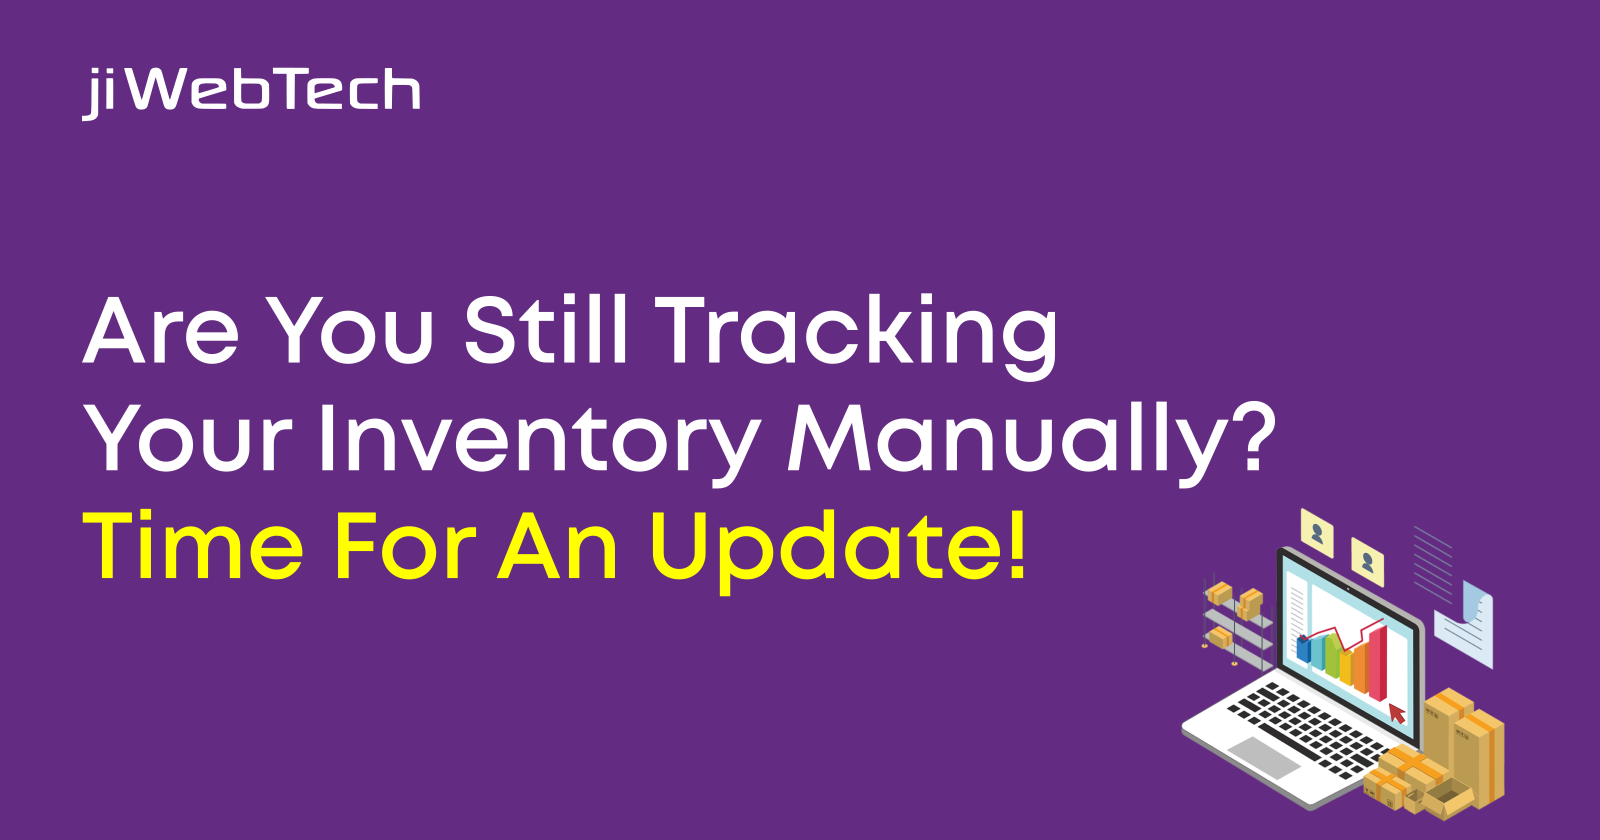 Are you Still Tracking your Inventory Manually? Time for an Update!